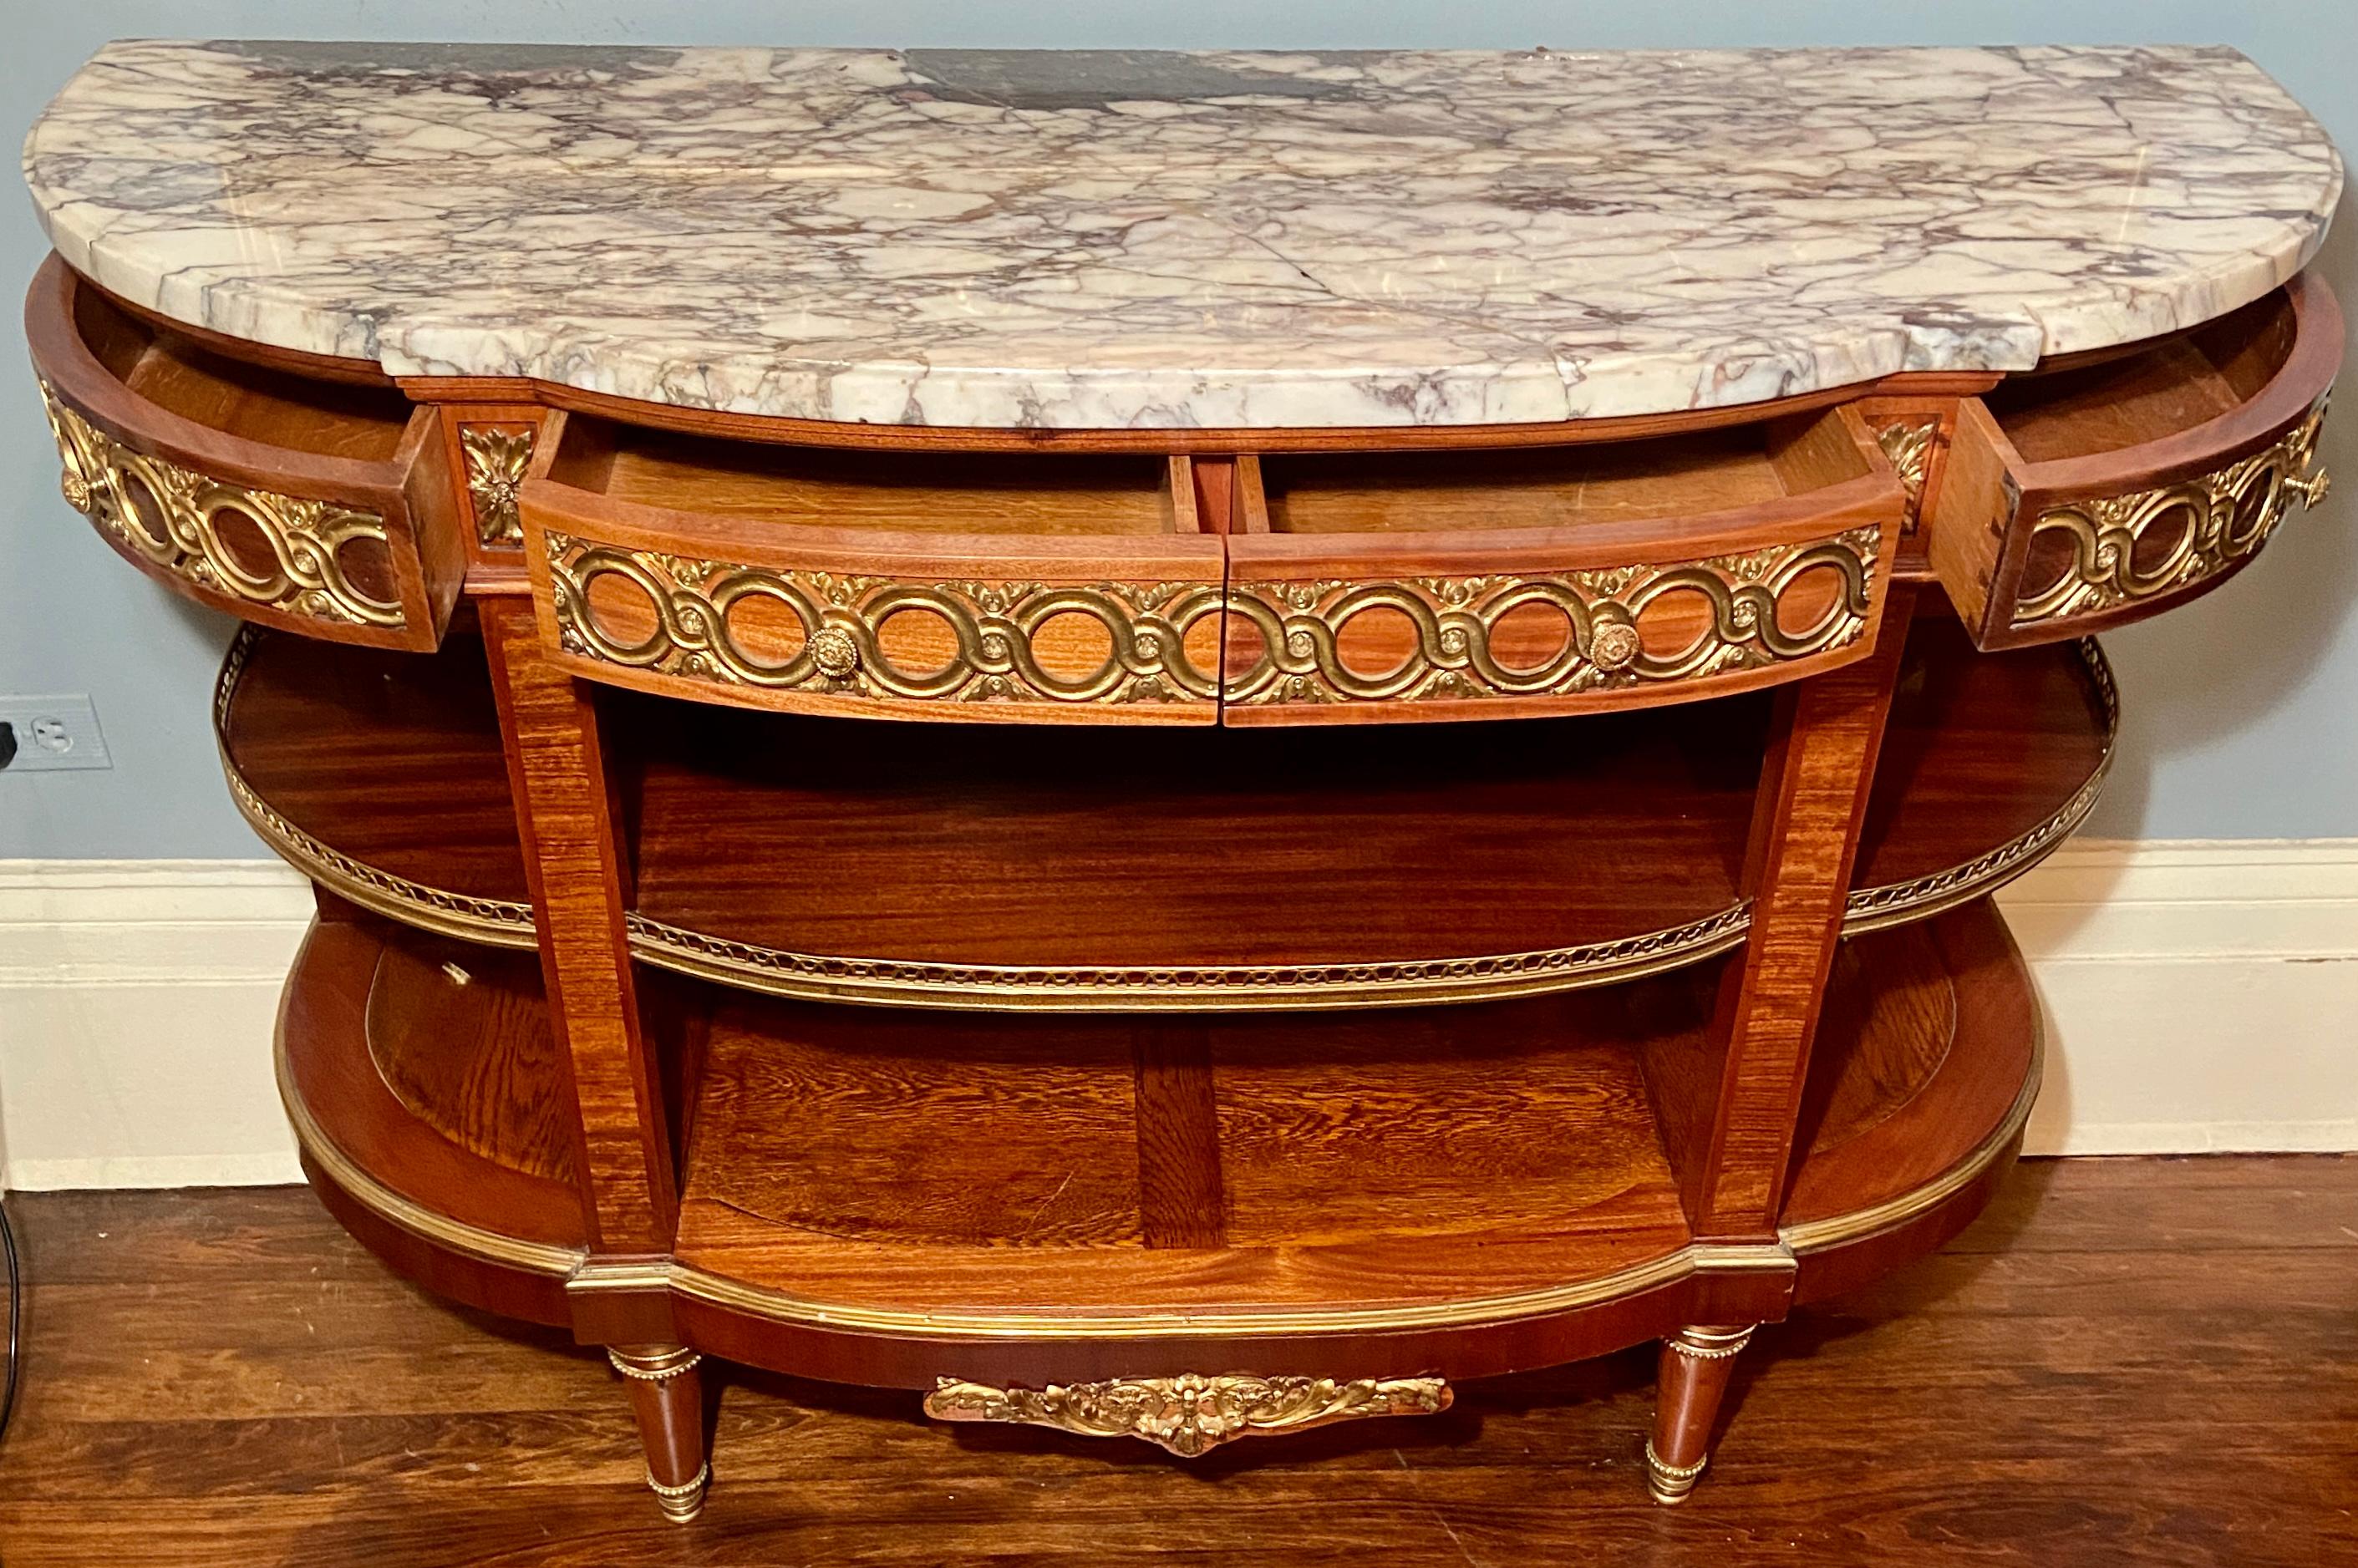 Antique French mahogany and bronze d'ore marble top server, Circa 1880.